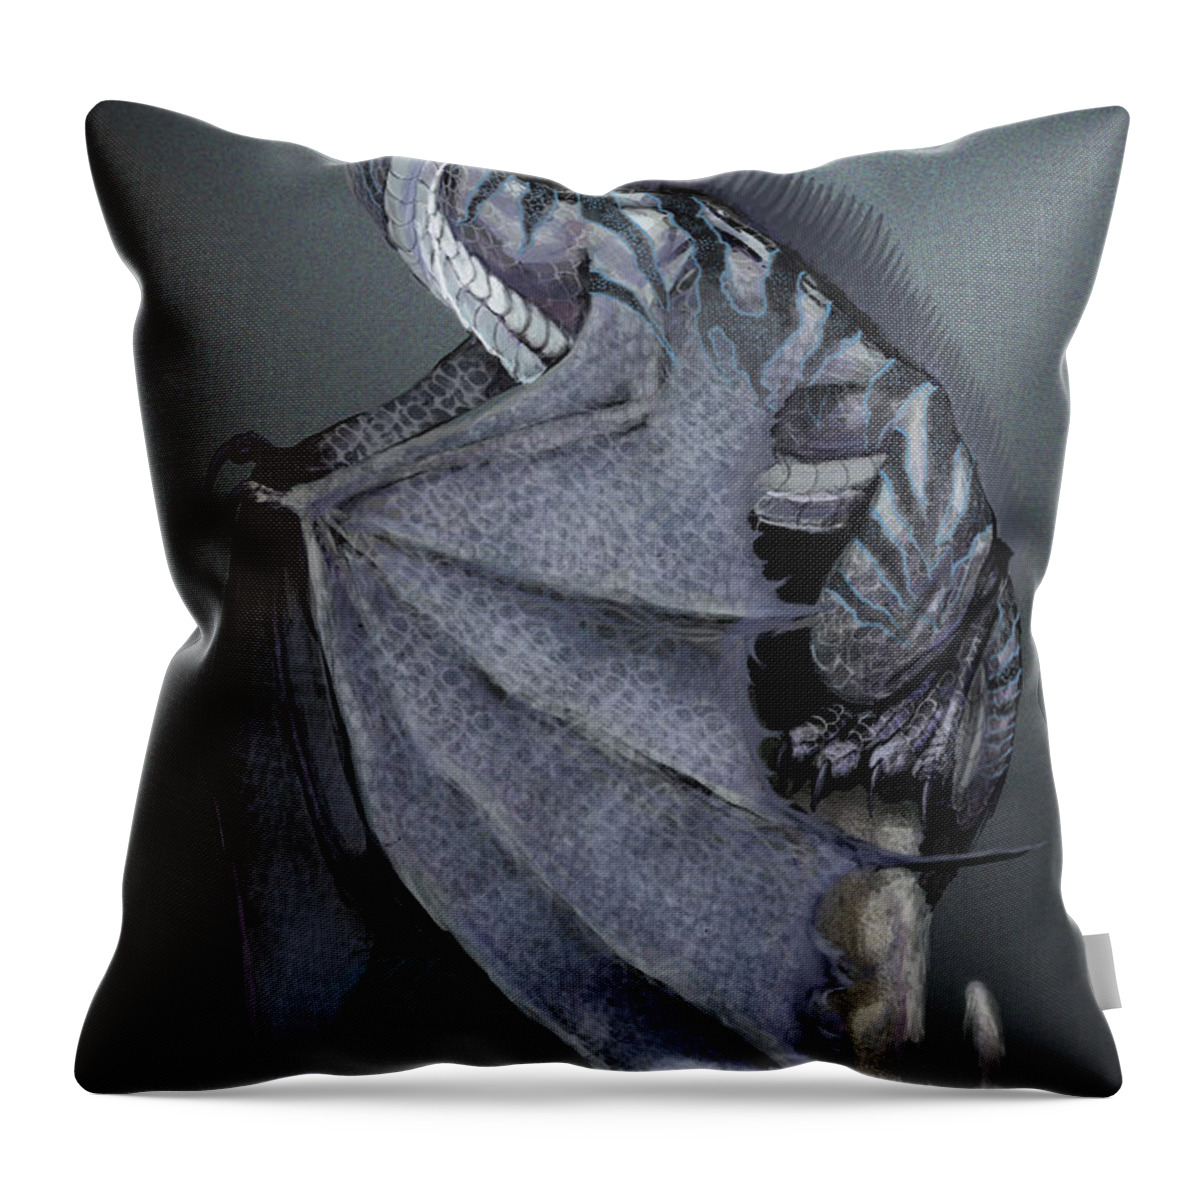 Dragon Throw Pillow featuring the digital art Nickel Dragon by Stanley Morrison